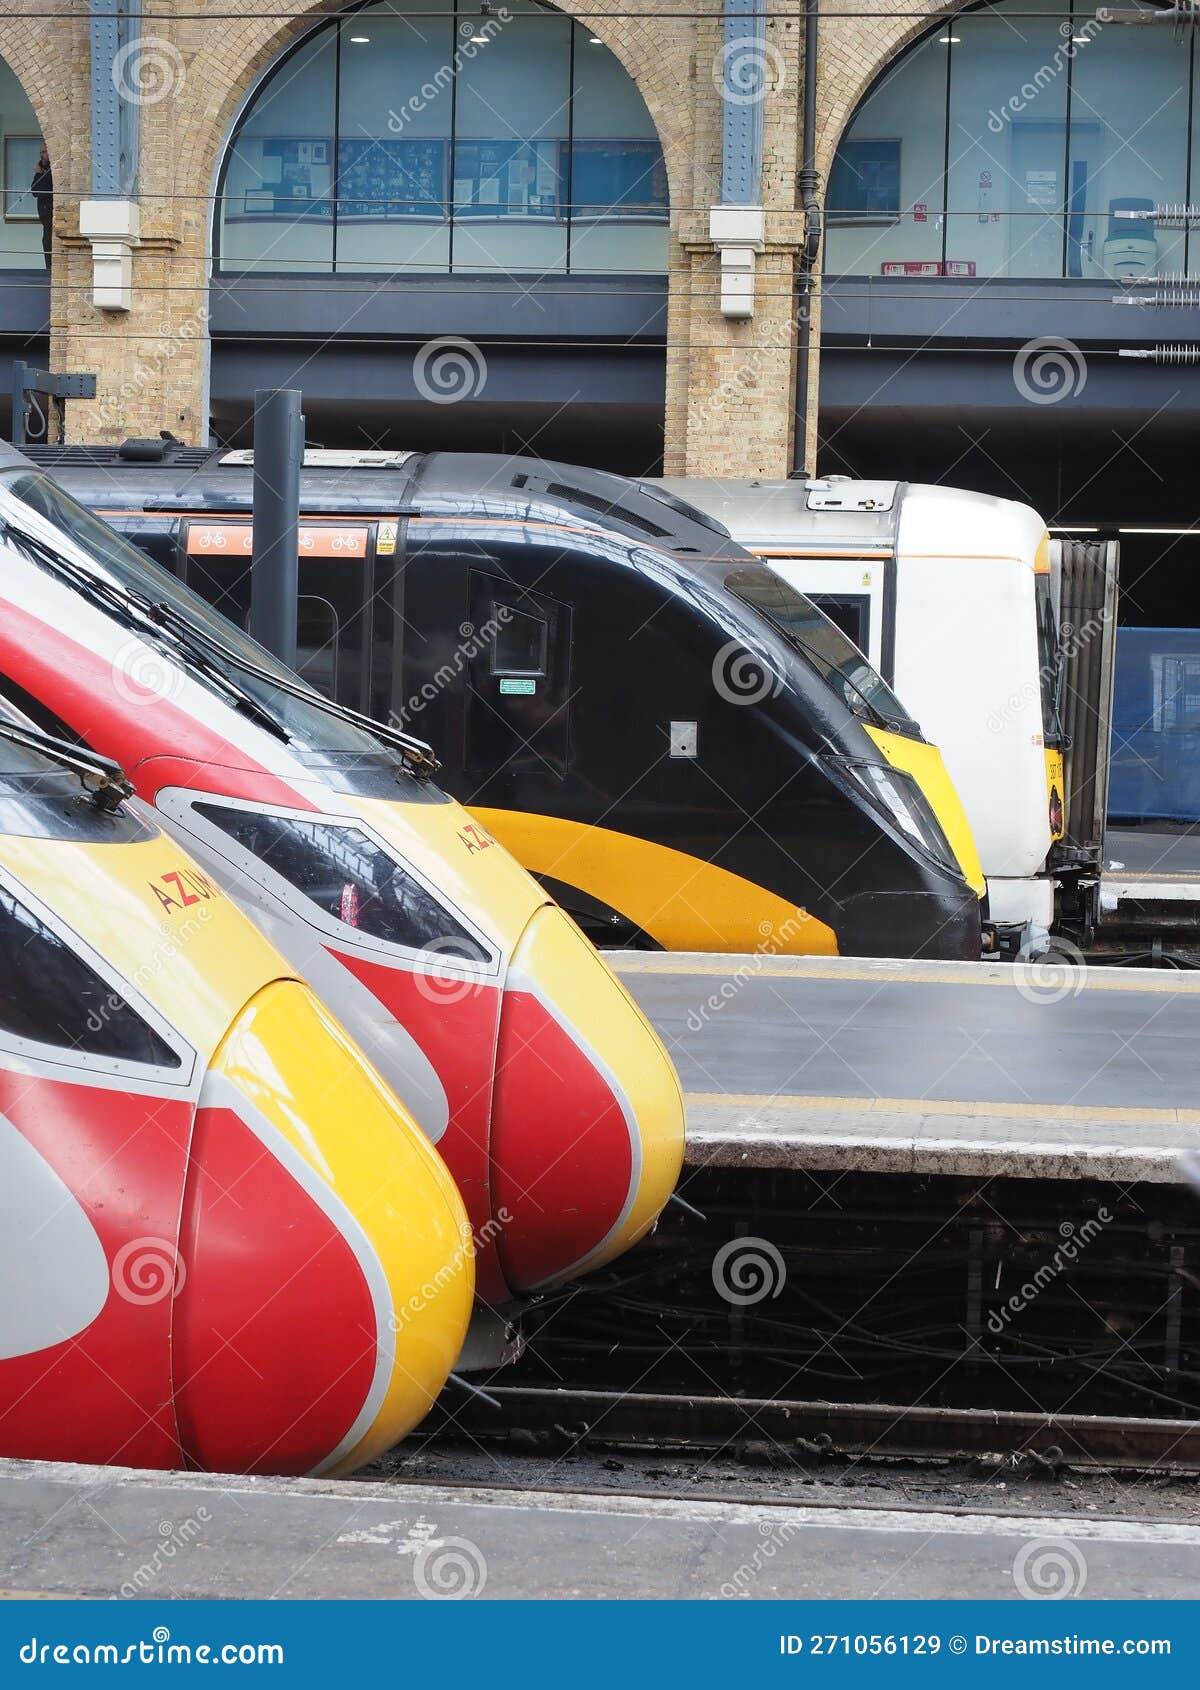 contrasting train profiles at london king's cross